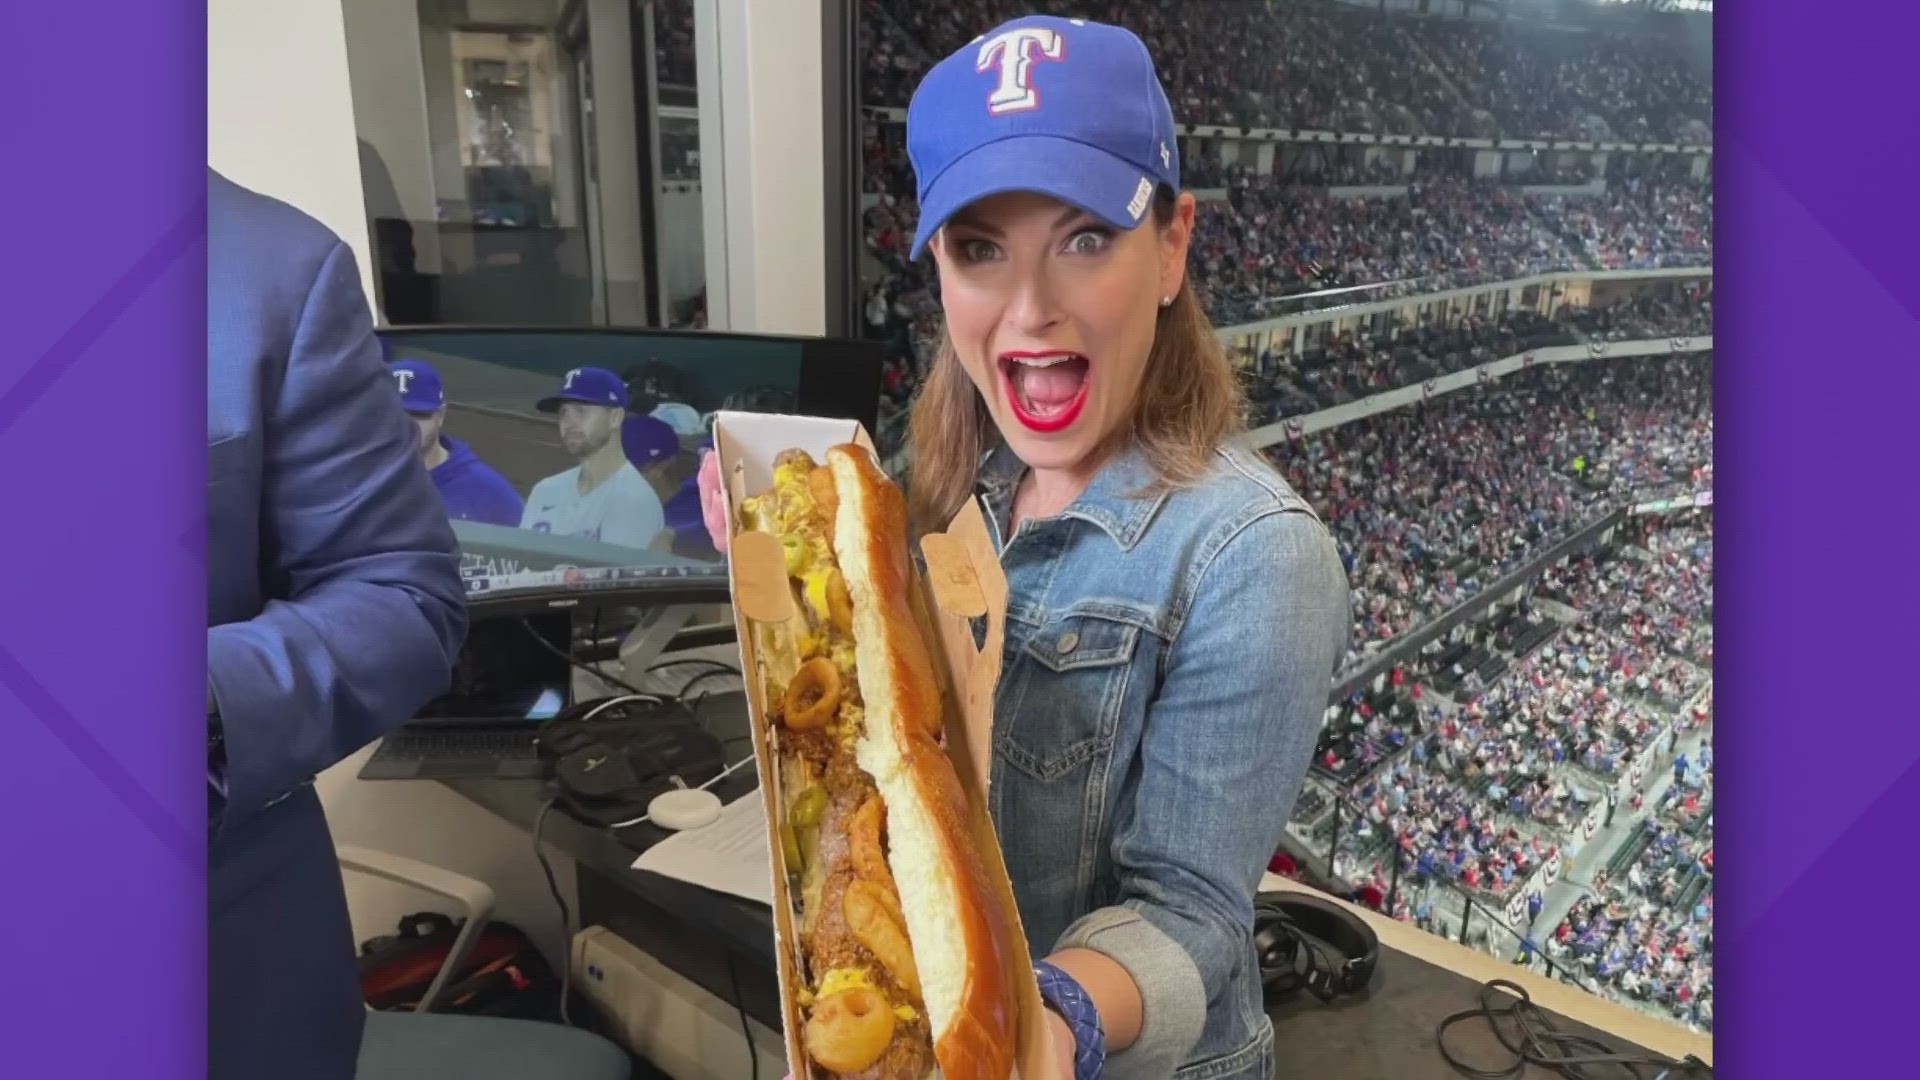 The new offering is "24 inches of Nolan Ryan beef" -- and the consensus from WFAA's Joe Trahan and Teresa Woodard? It's delicious!